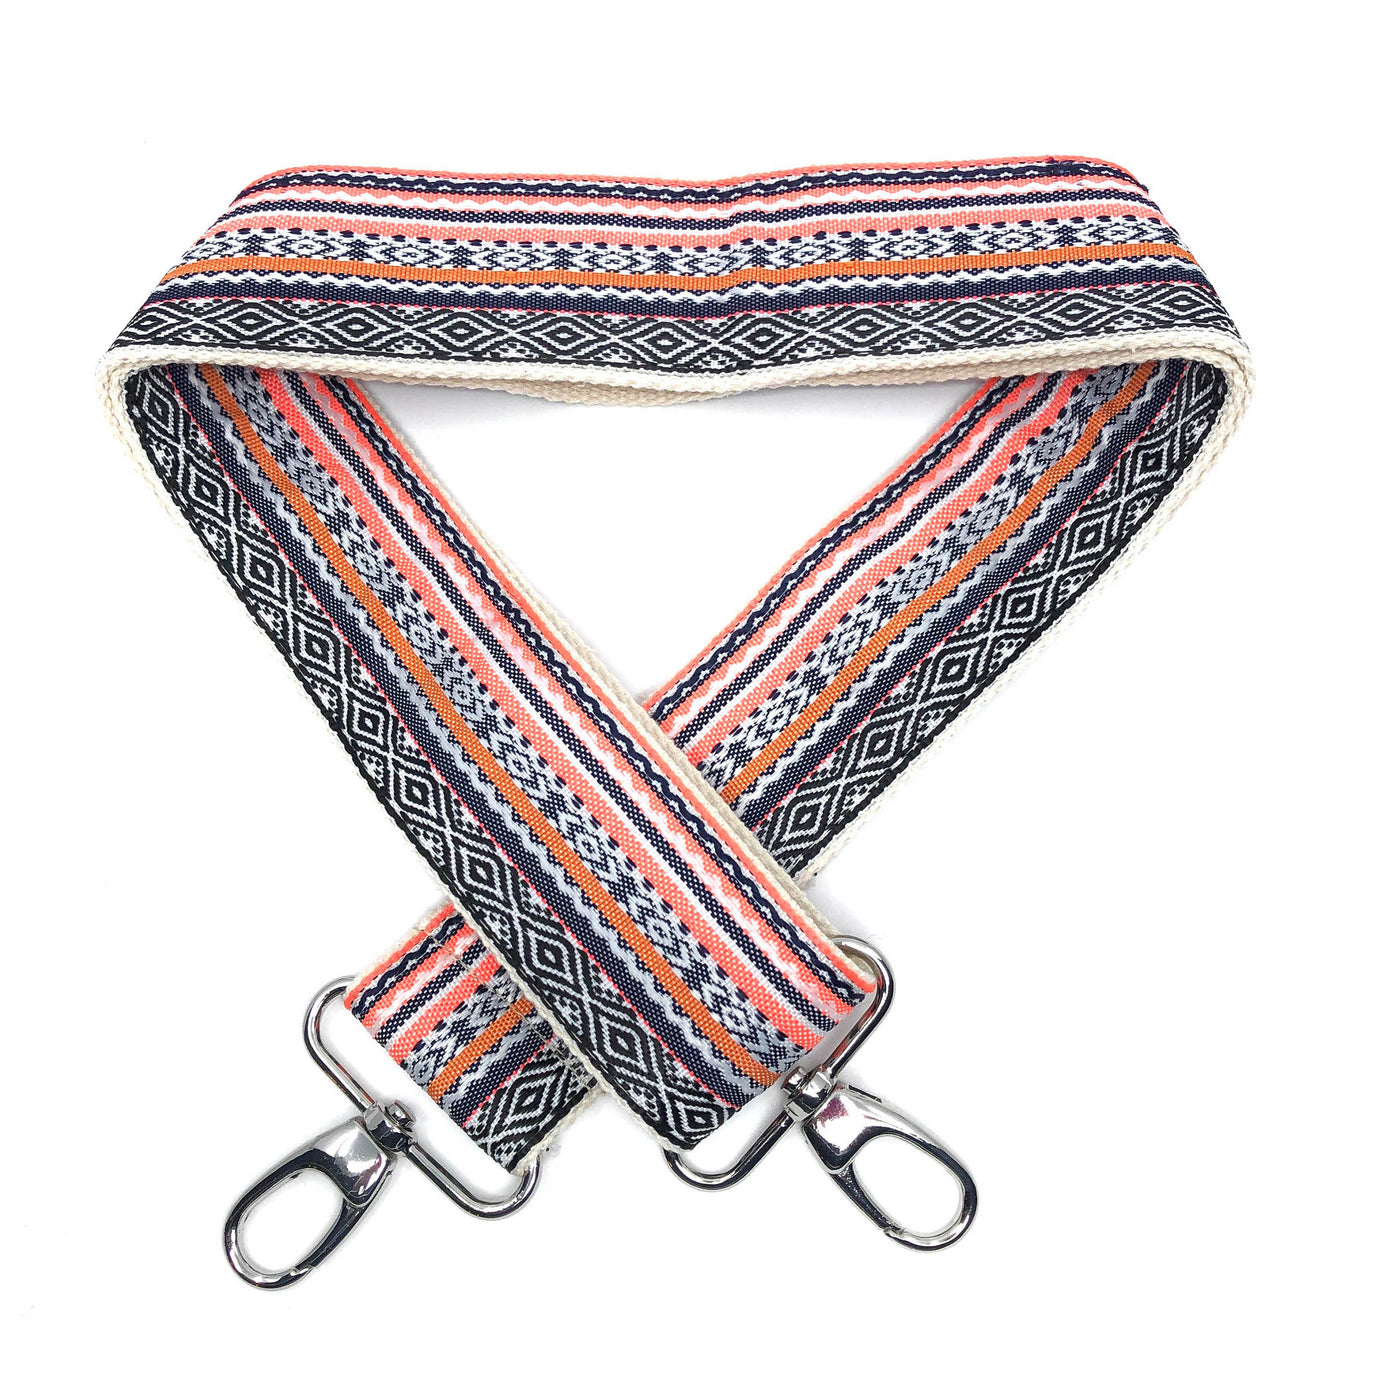 A close-up on white background of an adjustable length, woven bag strap with black, white, orange and pink pattern and metal clasp. 